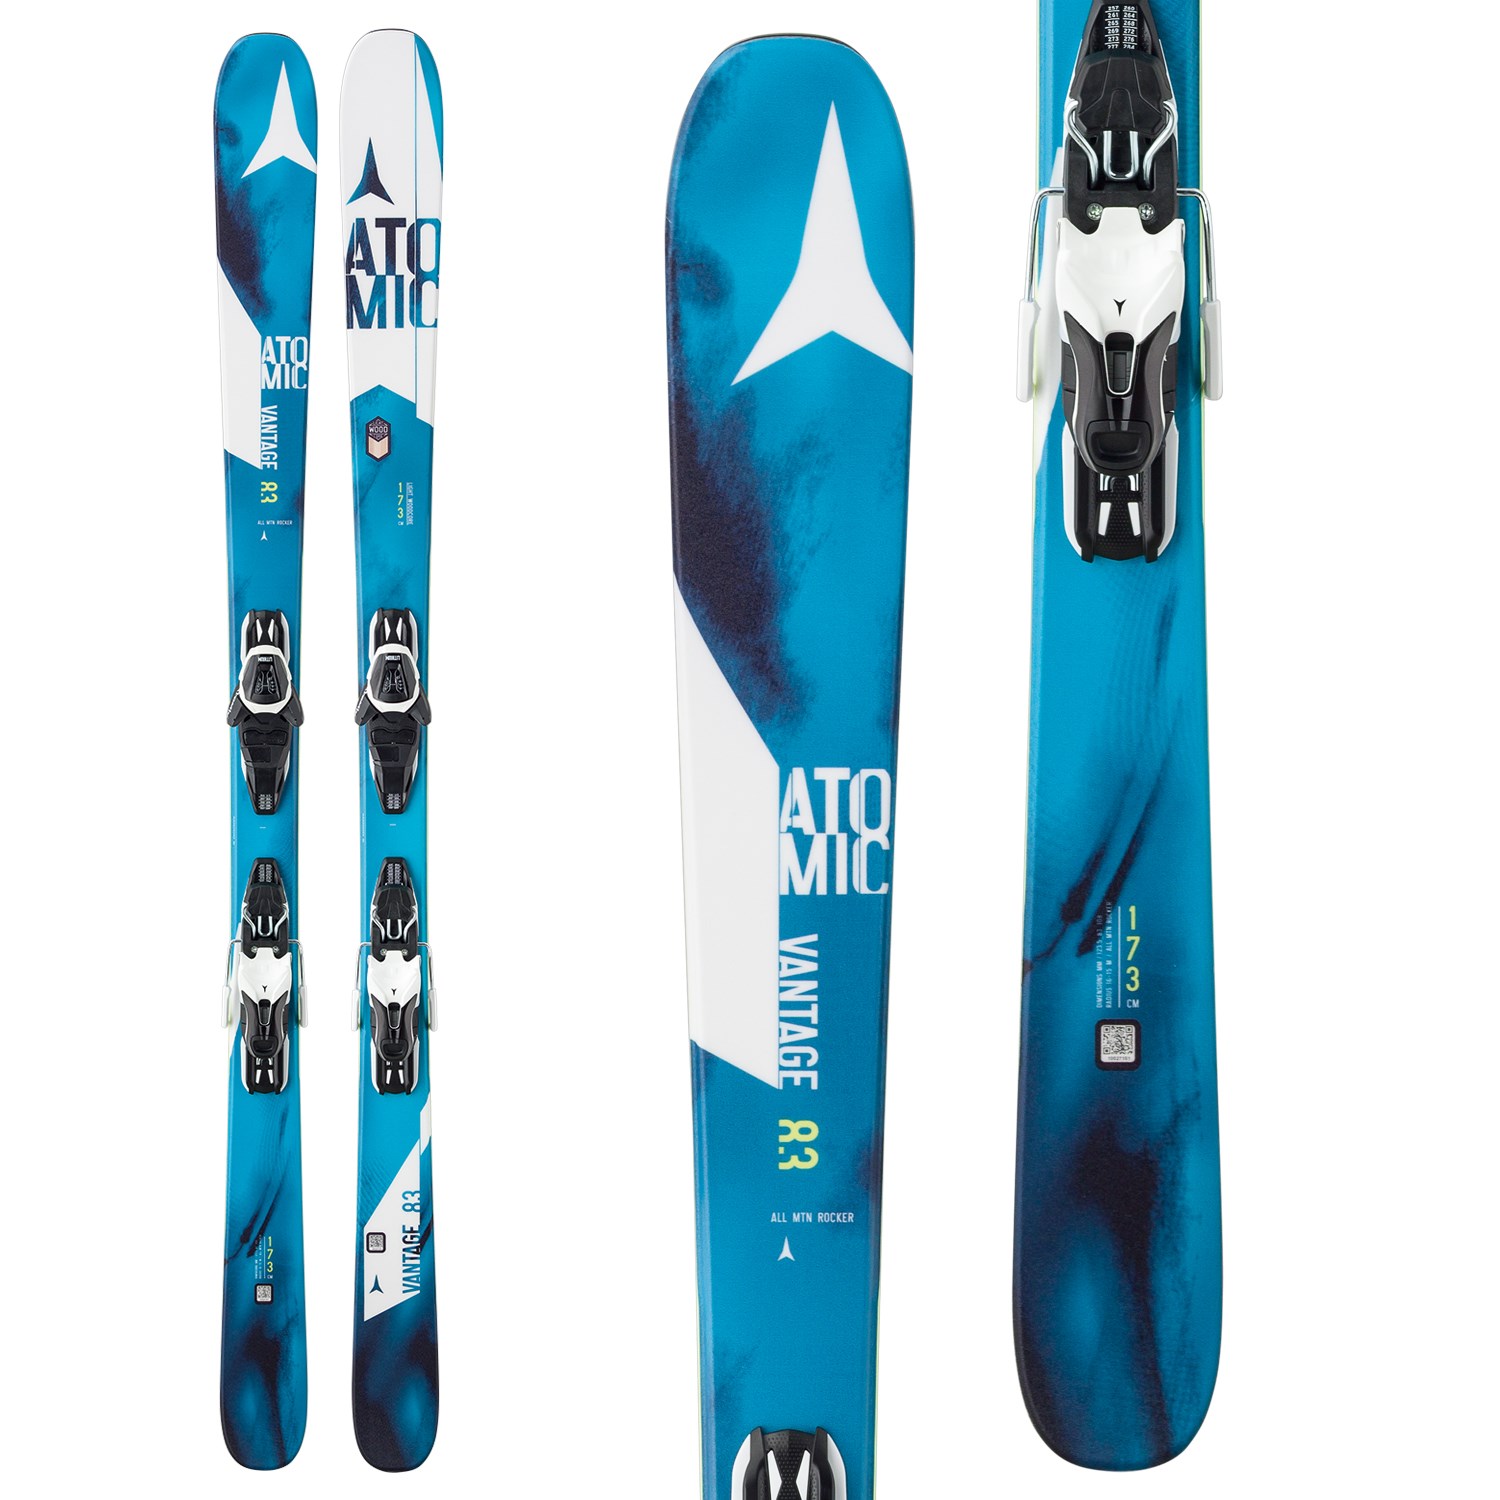 Discount Skis Ski Gear Sale pertaining to How To Buy Used Ski Equipment